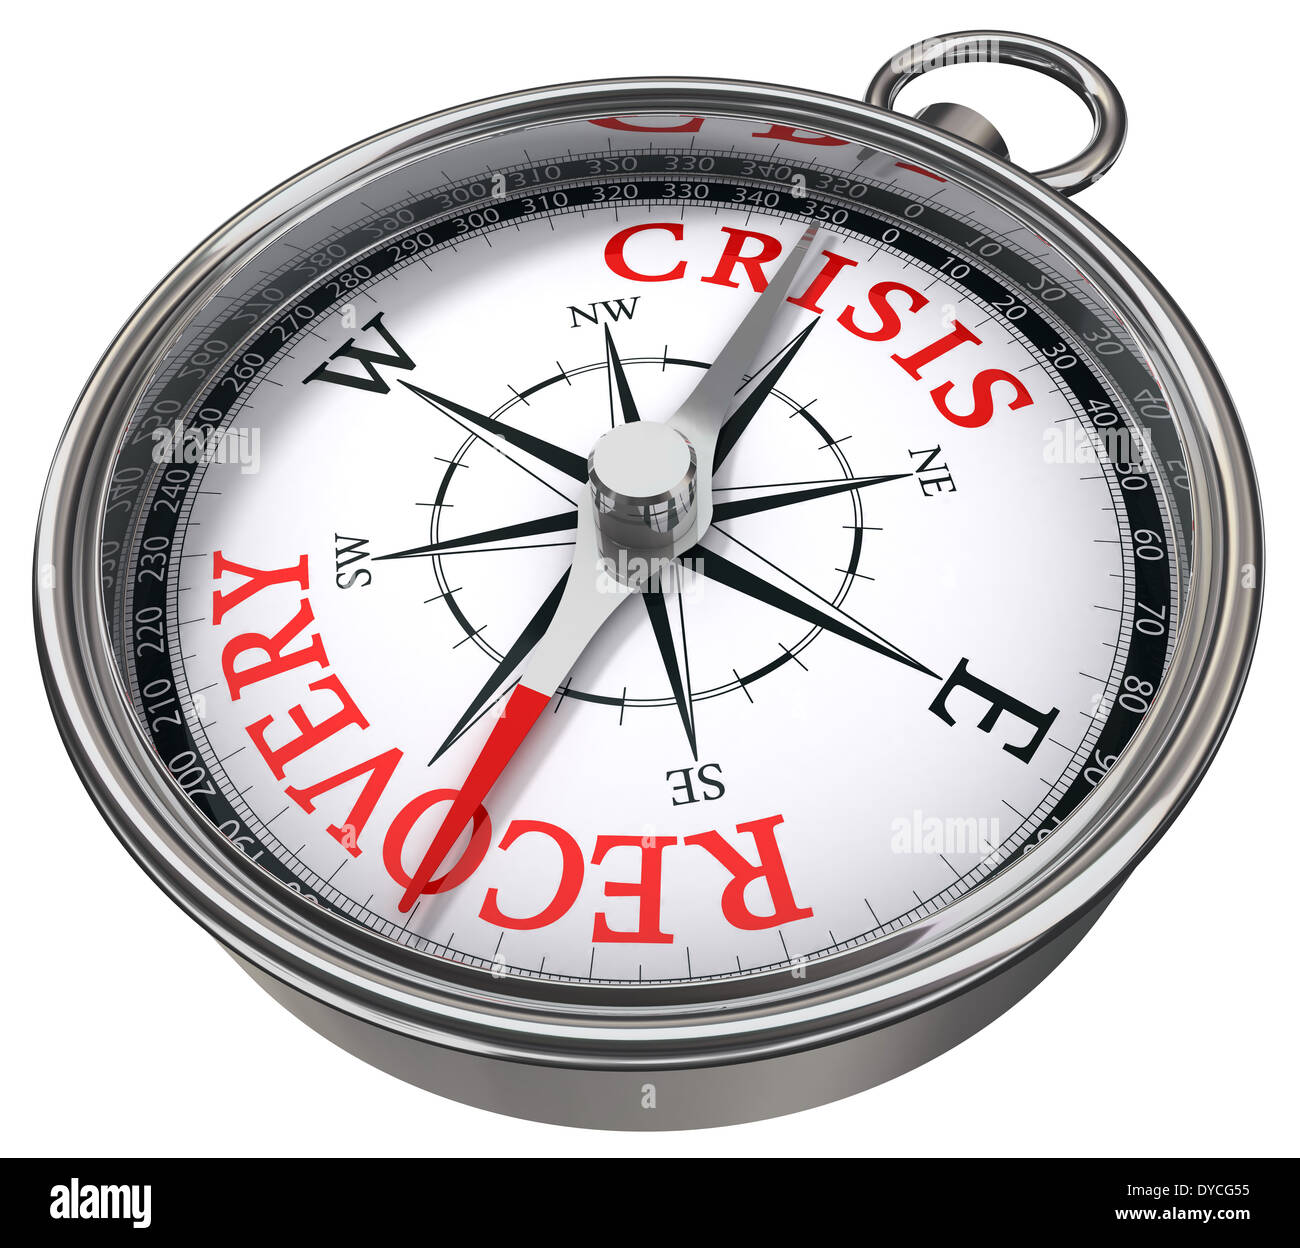 crisis versus recovery concept compass isolated on white background Stock Photo